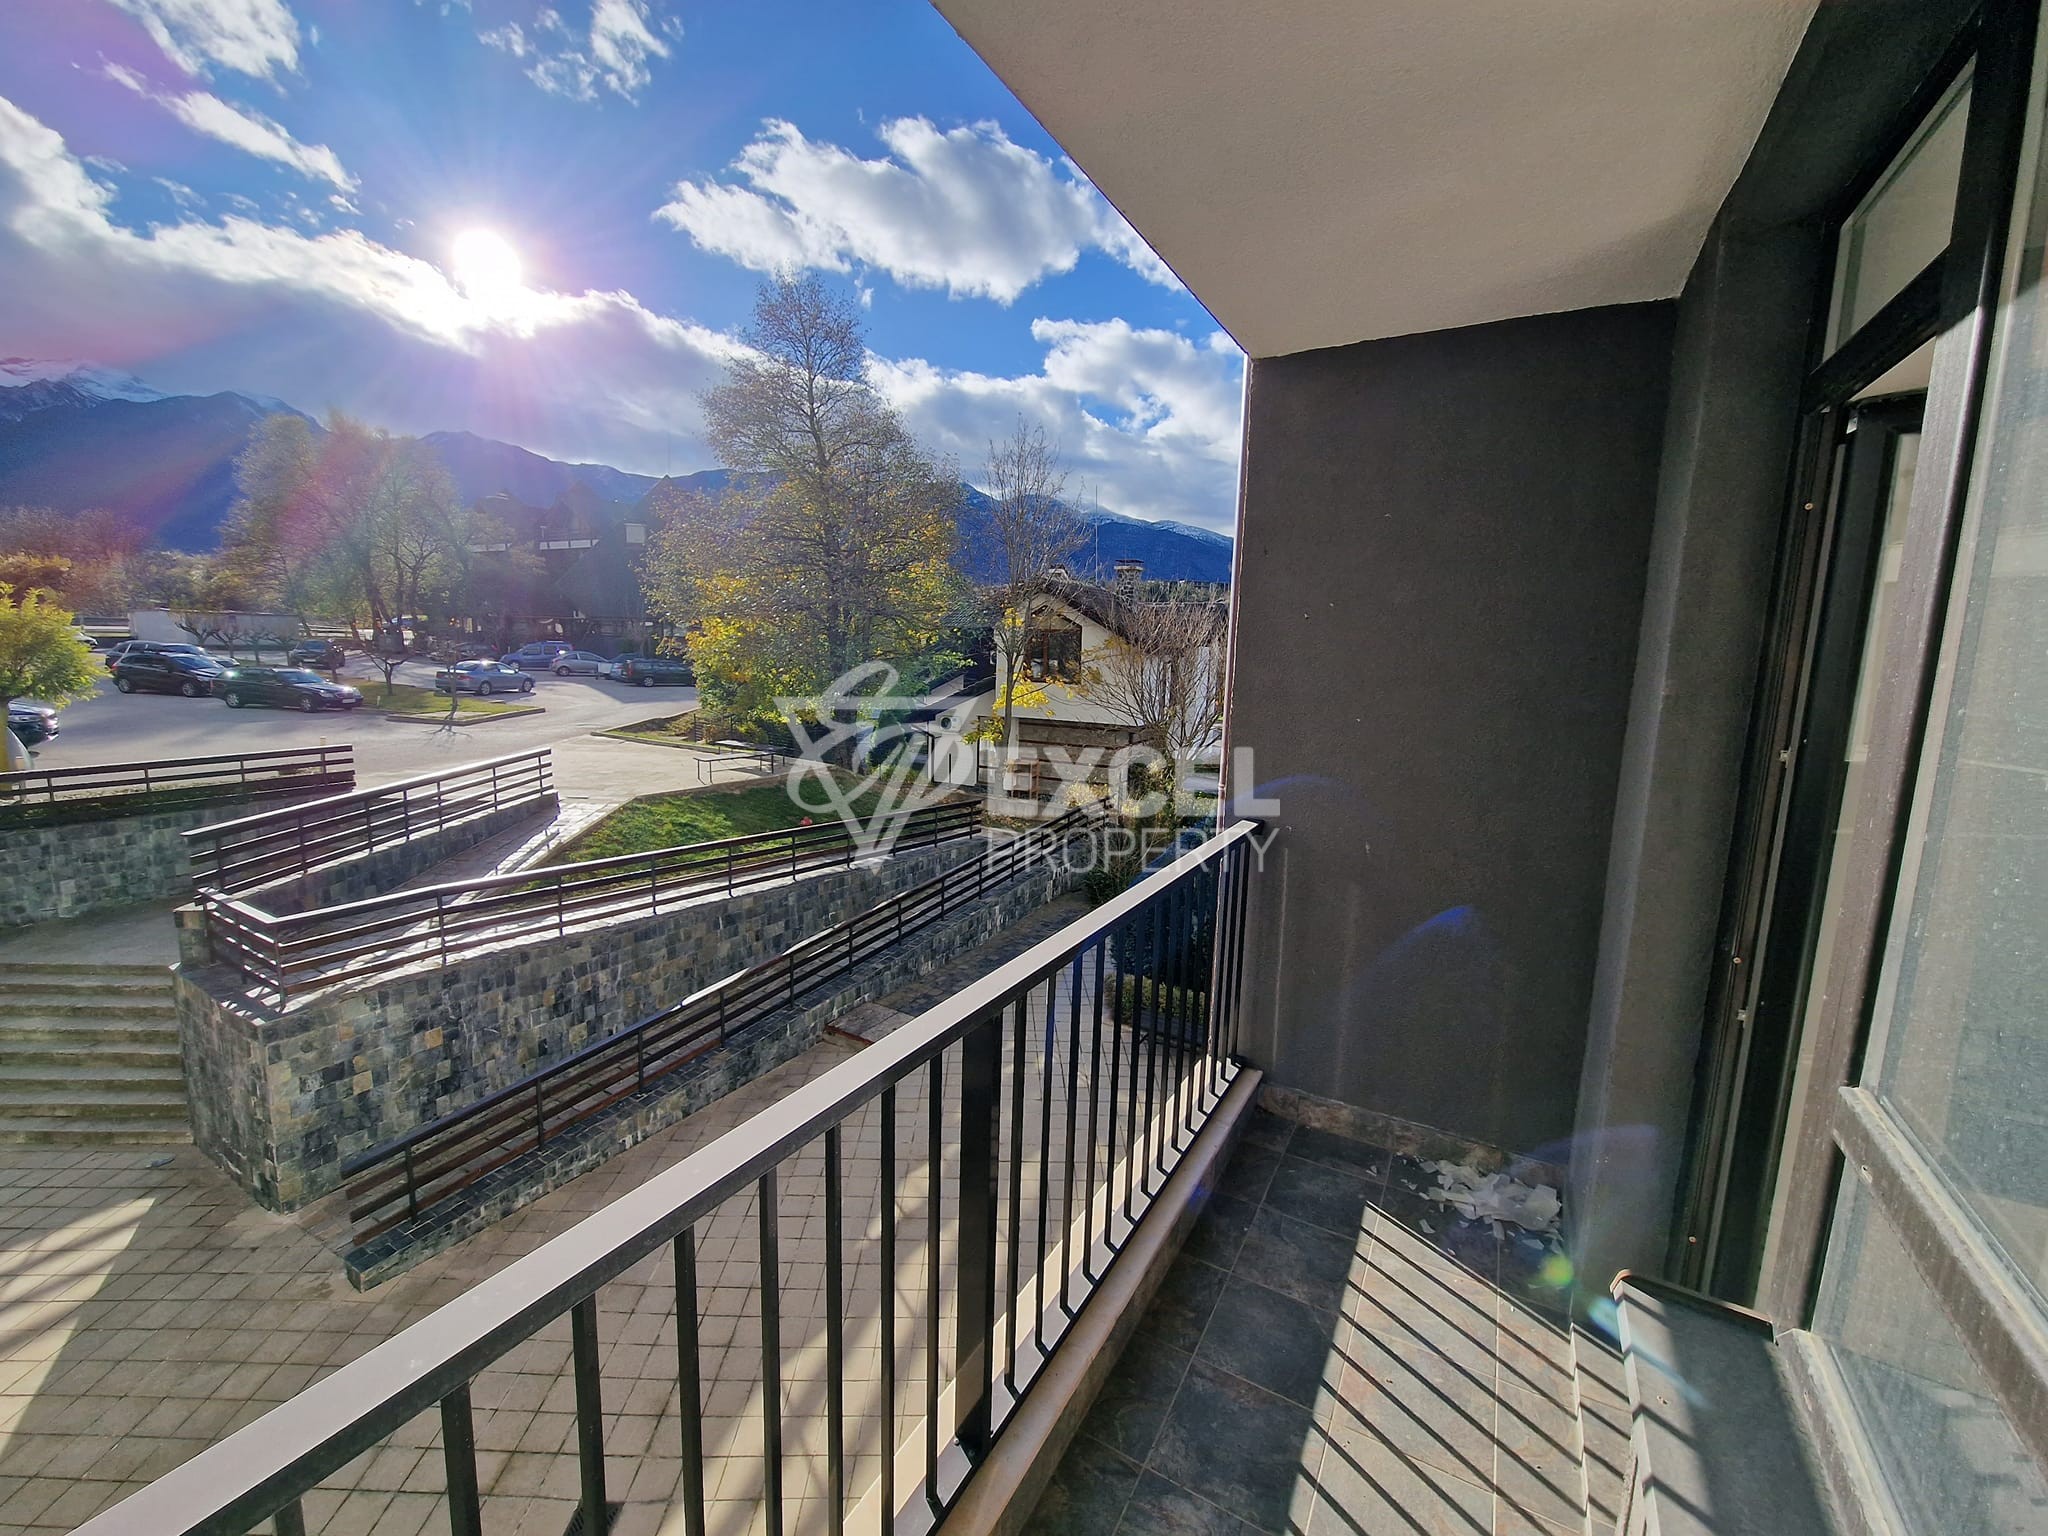 Southern studio with new furniture and a wonderful view of the Pirin Mountains for sale in the region of Bansko and Razlog